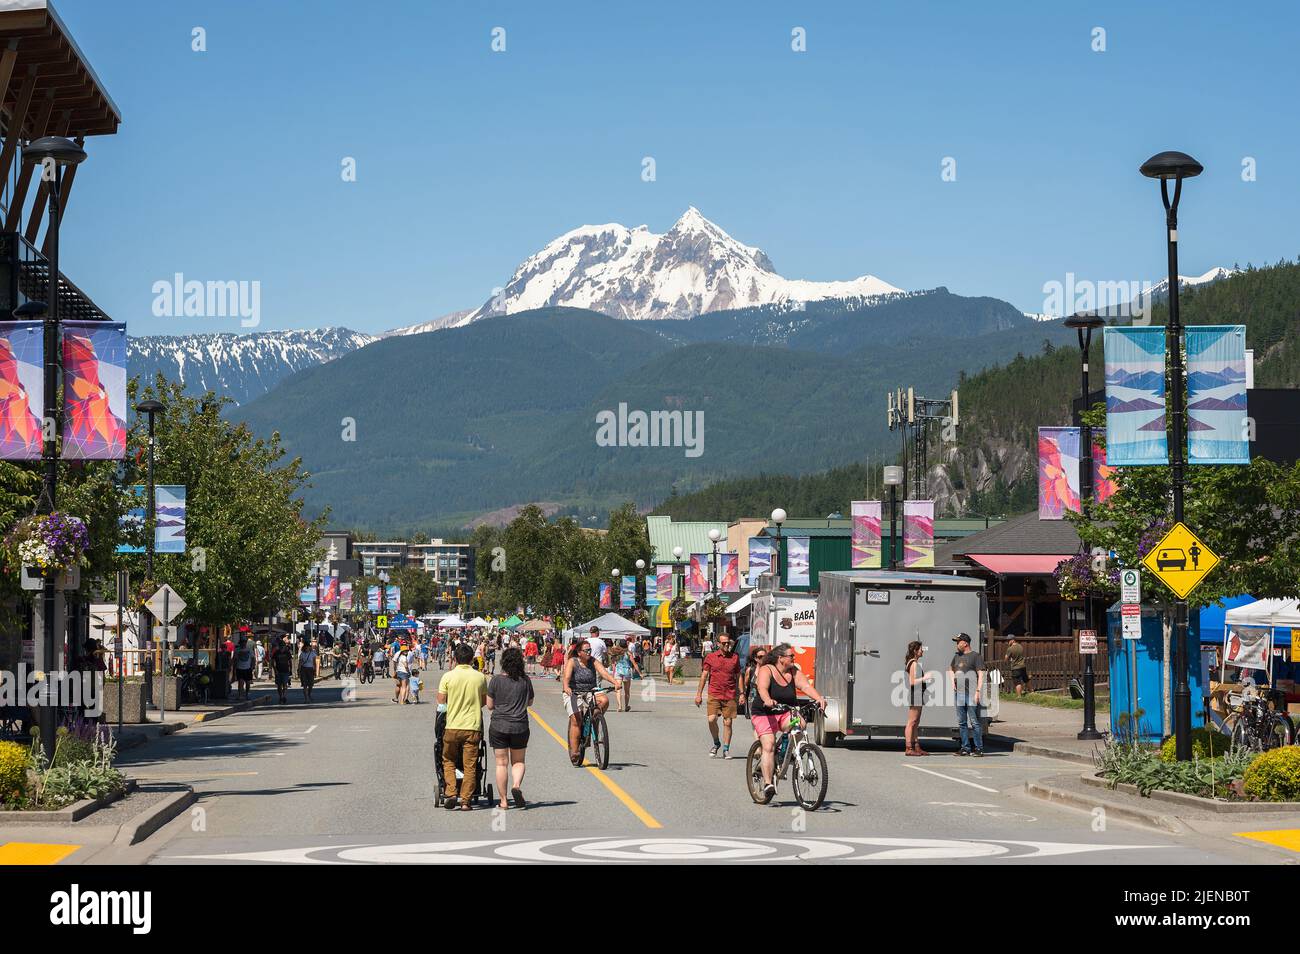 Downtown Squamish BC with Cleveland Avenue closed off for a street market. Stock Photo